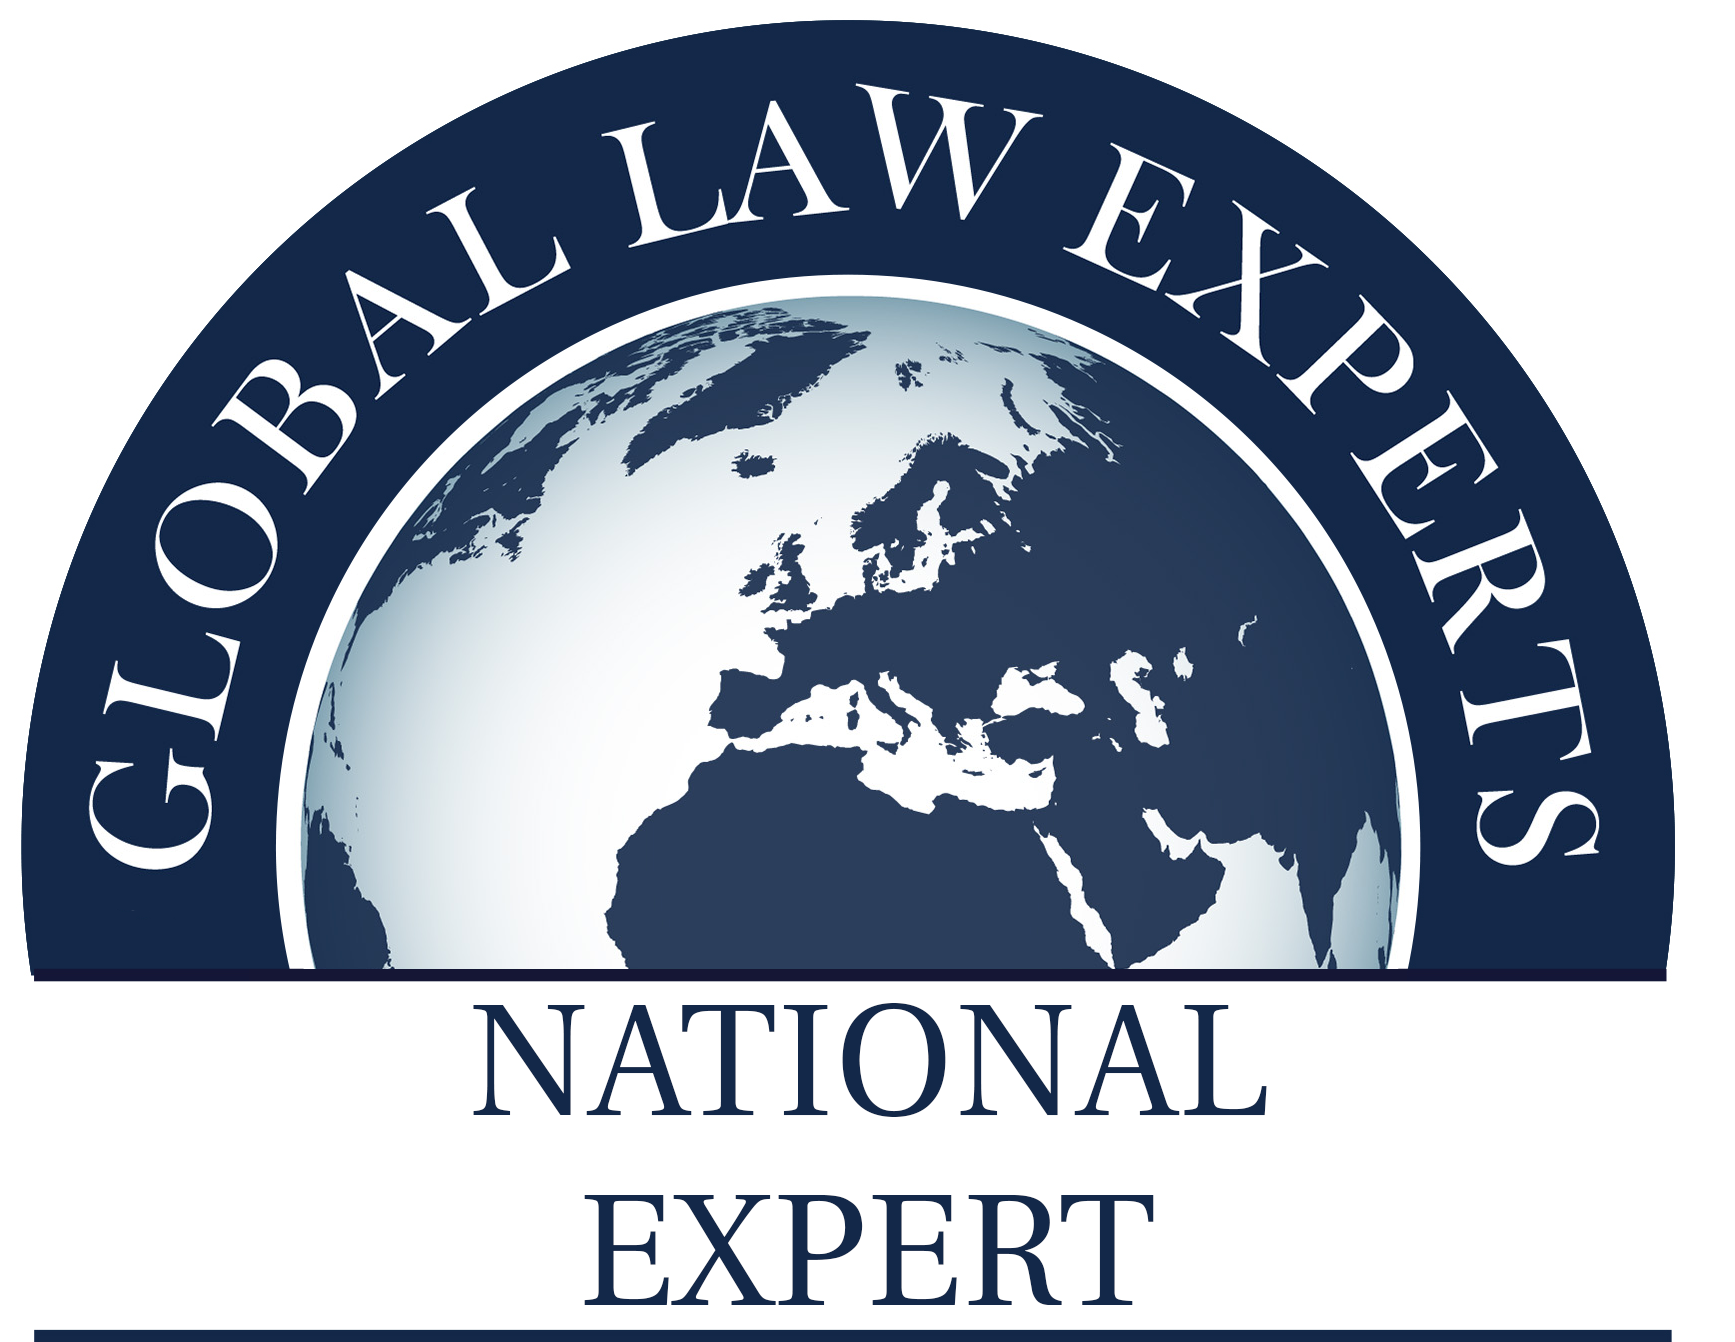 GLOBAL LAW EXPERTS - NATIONAL EXPERT - 2 Lines